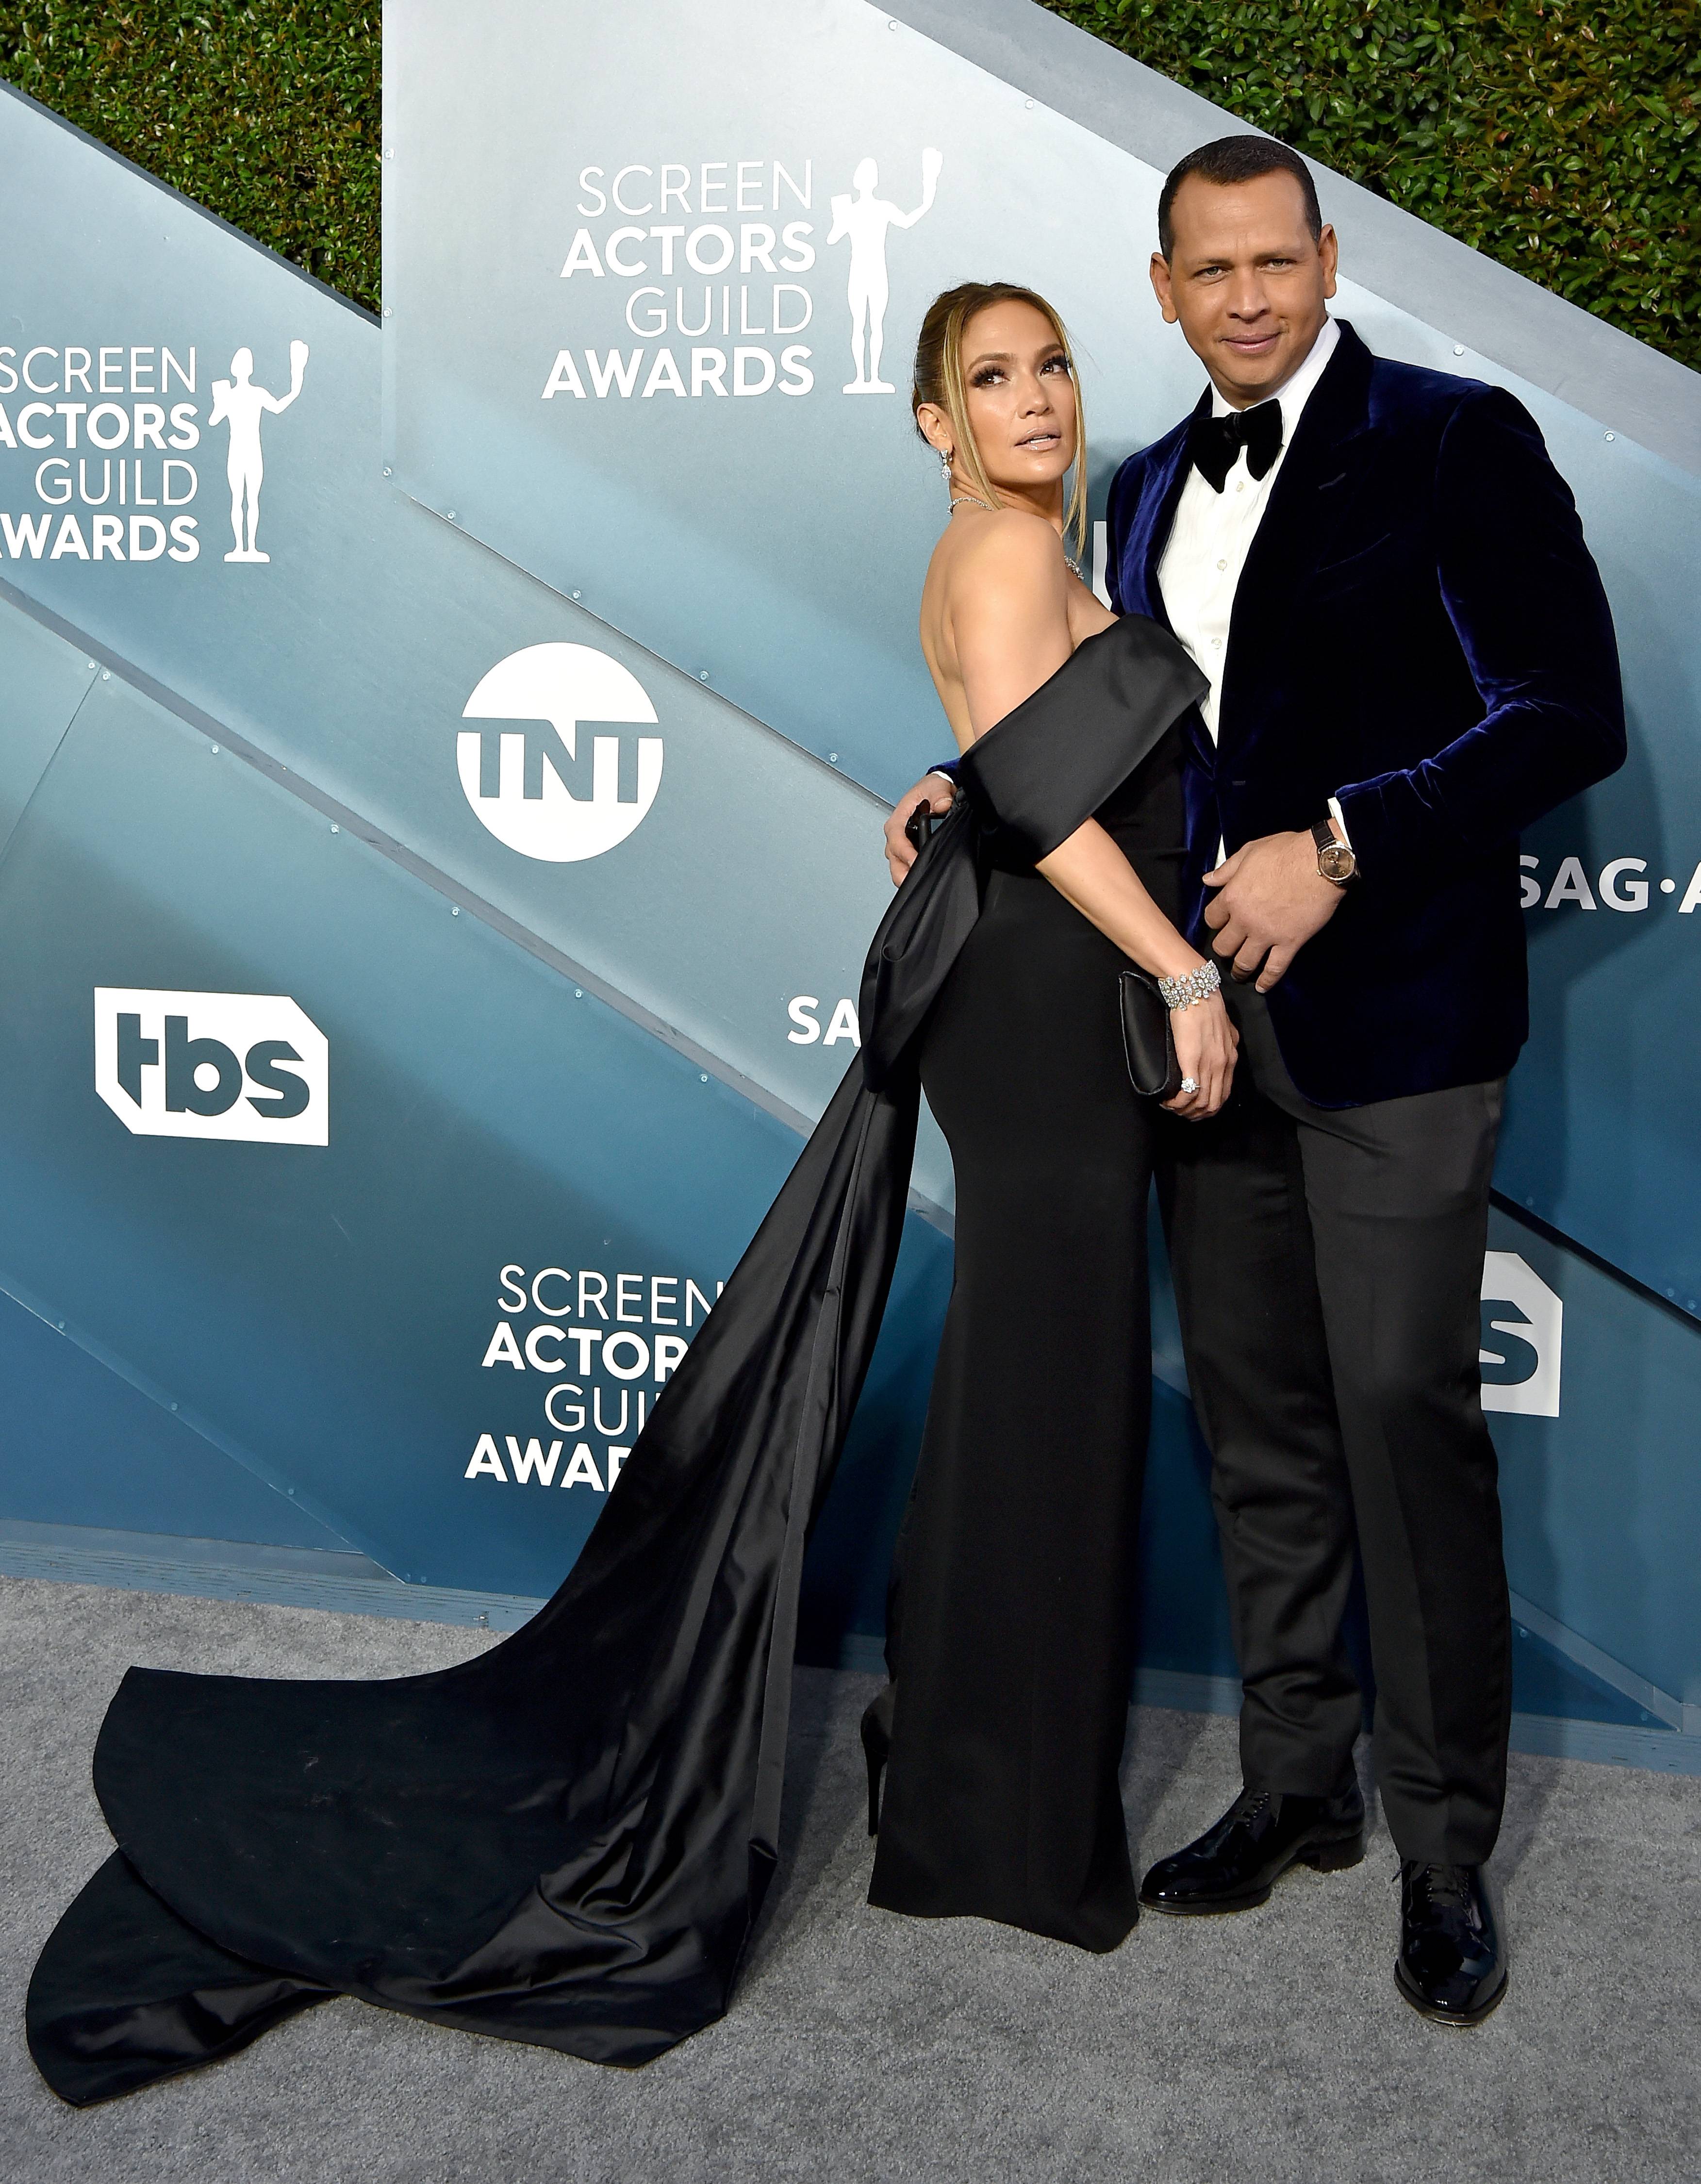 LOS ANGELES, CALIFORNIA - JANUARY 19: Jennifer Lopez and Alex Rodriguez attend the 26th Annual Screen Actors Guild Awards at The Shrine Auditorium on January 19, 2020 in Los Angeles, California. (Photo by Axelle/Bauer-Griffin/FilmMagic)